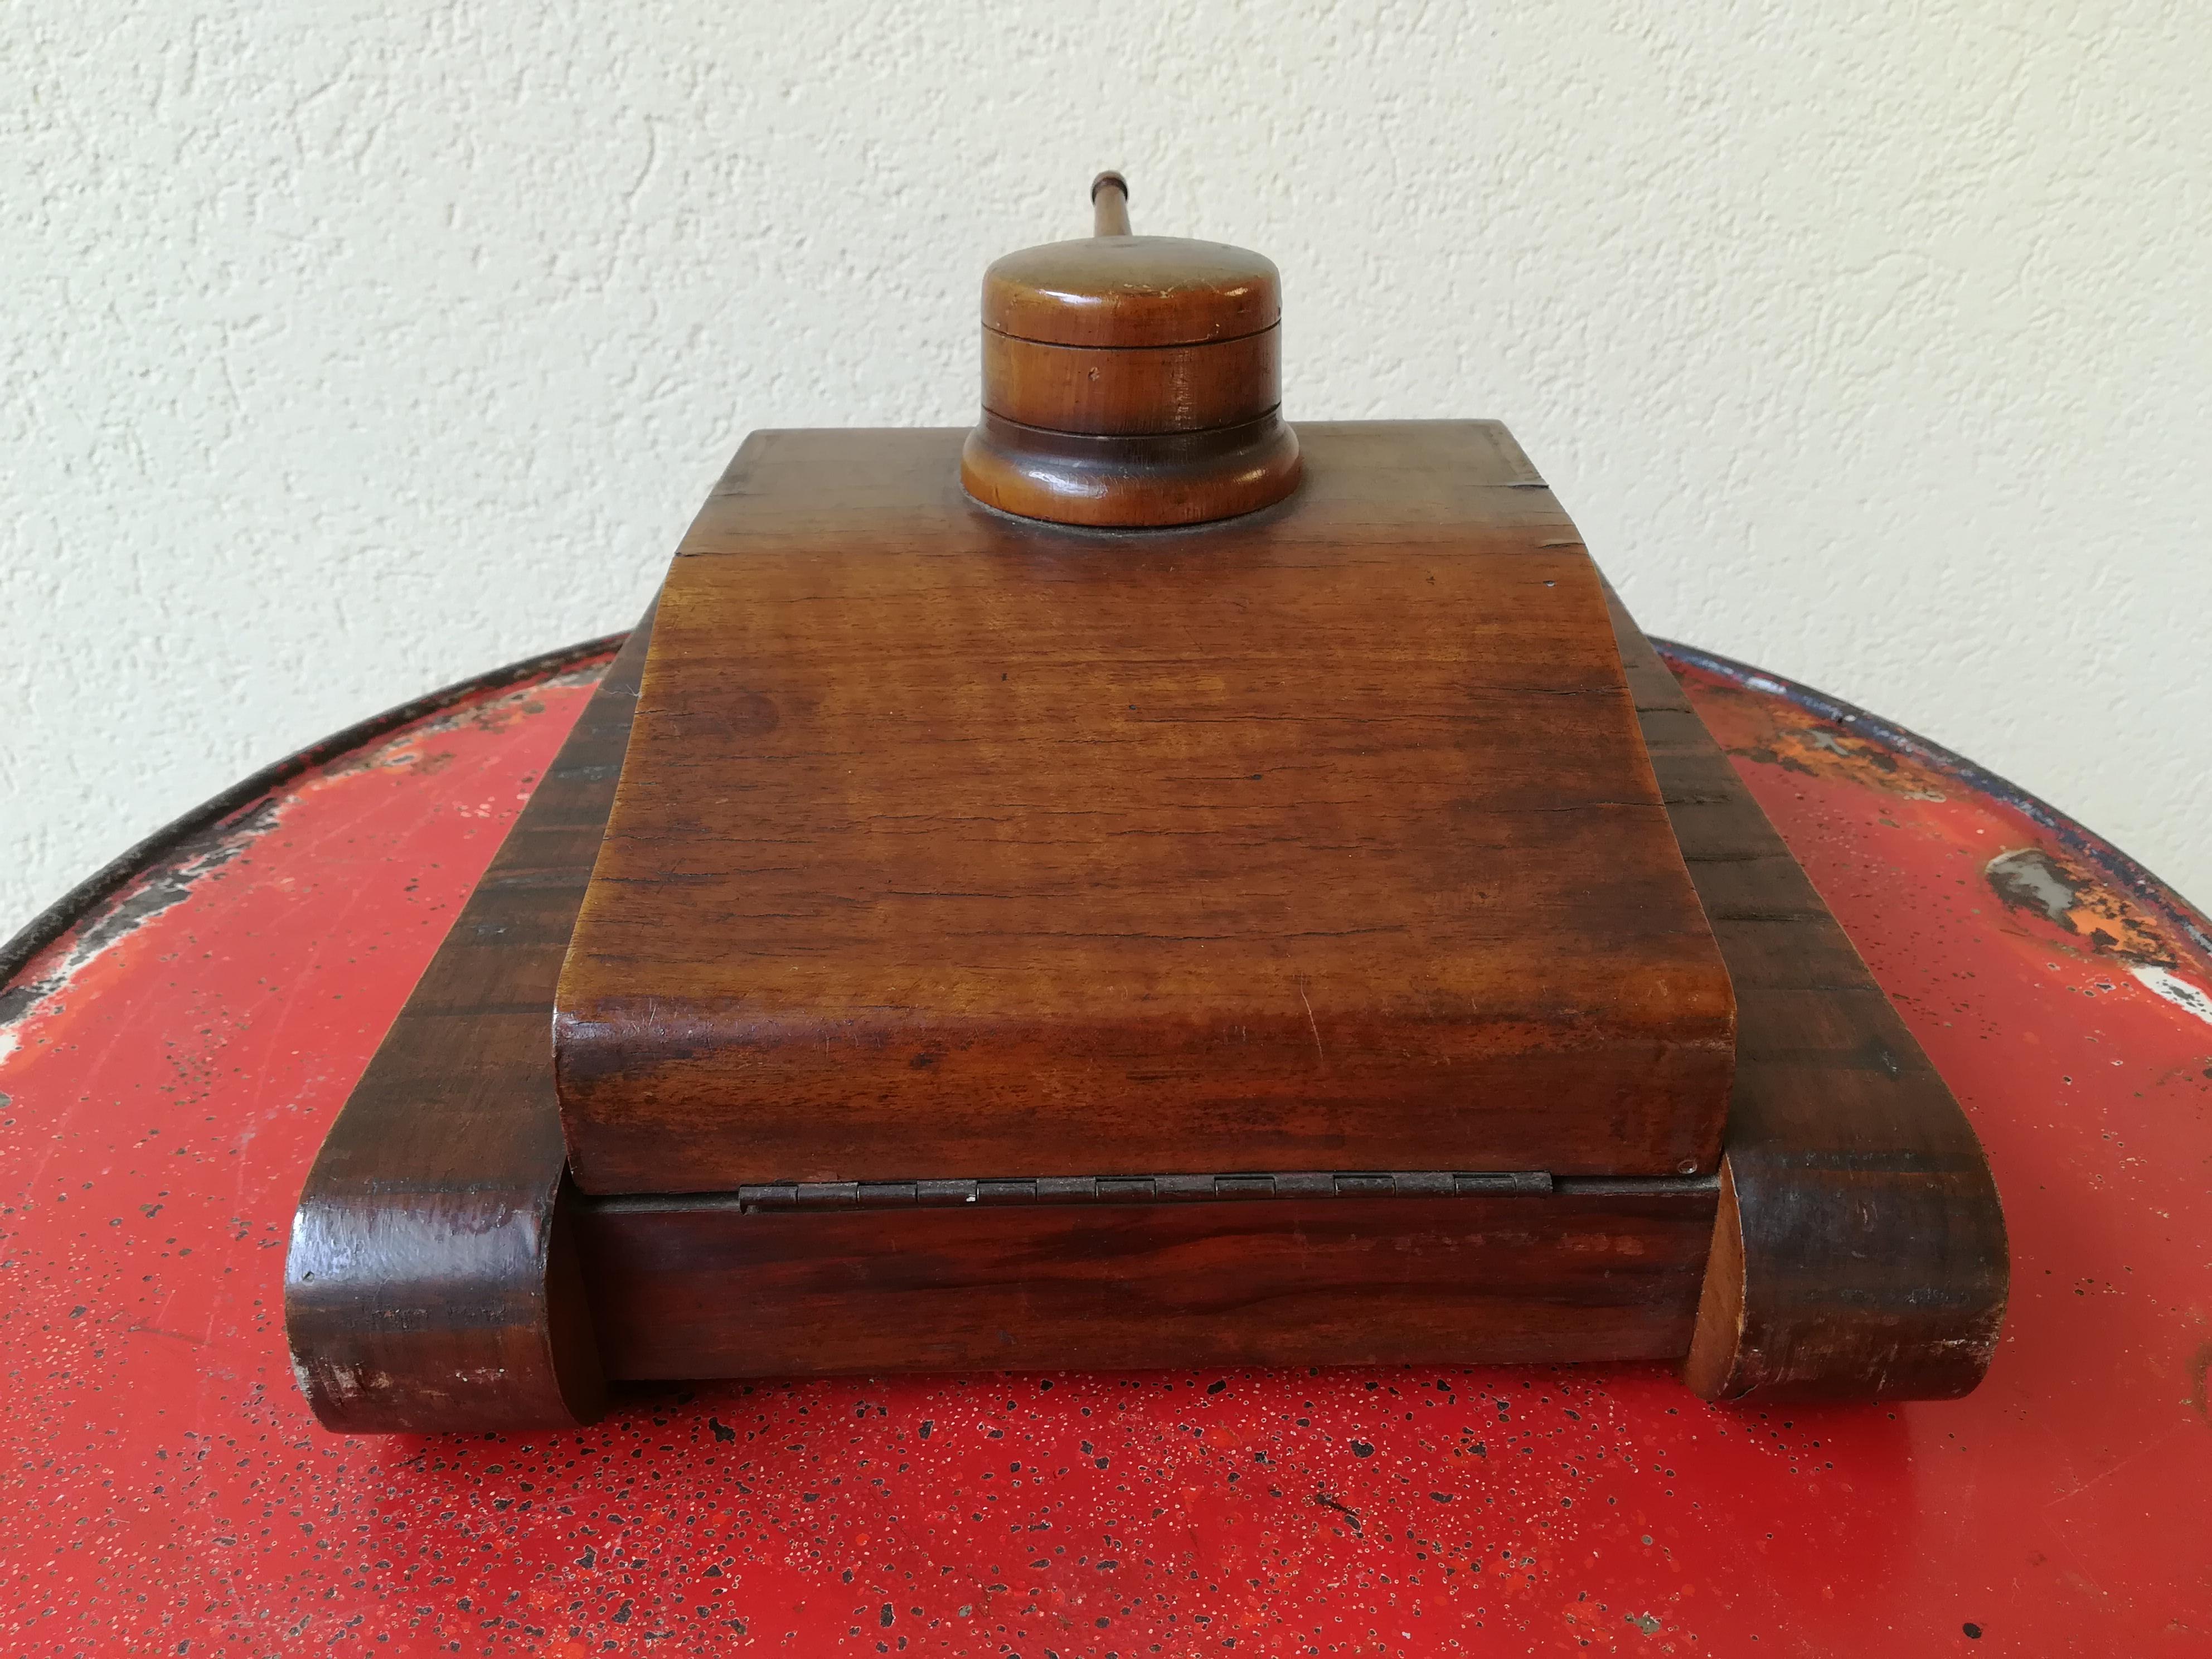 Mid-20th Century Italian Wood Box in a Shape of a Military Tank, 1940 For Sale 1